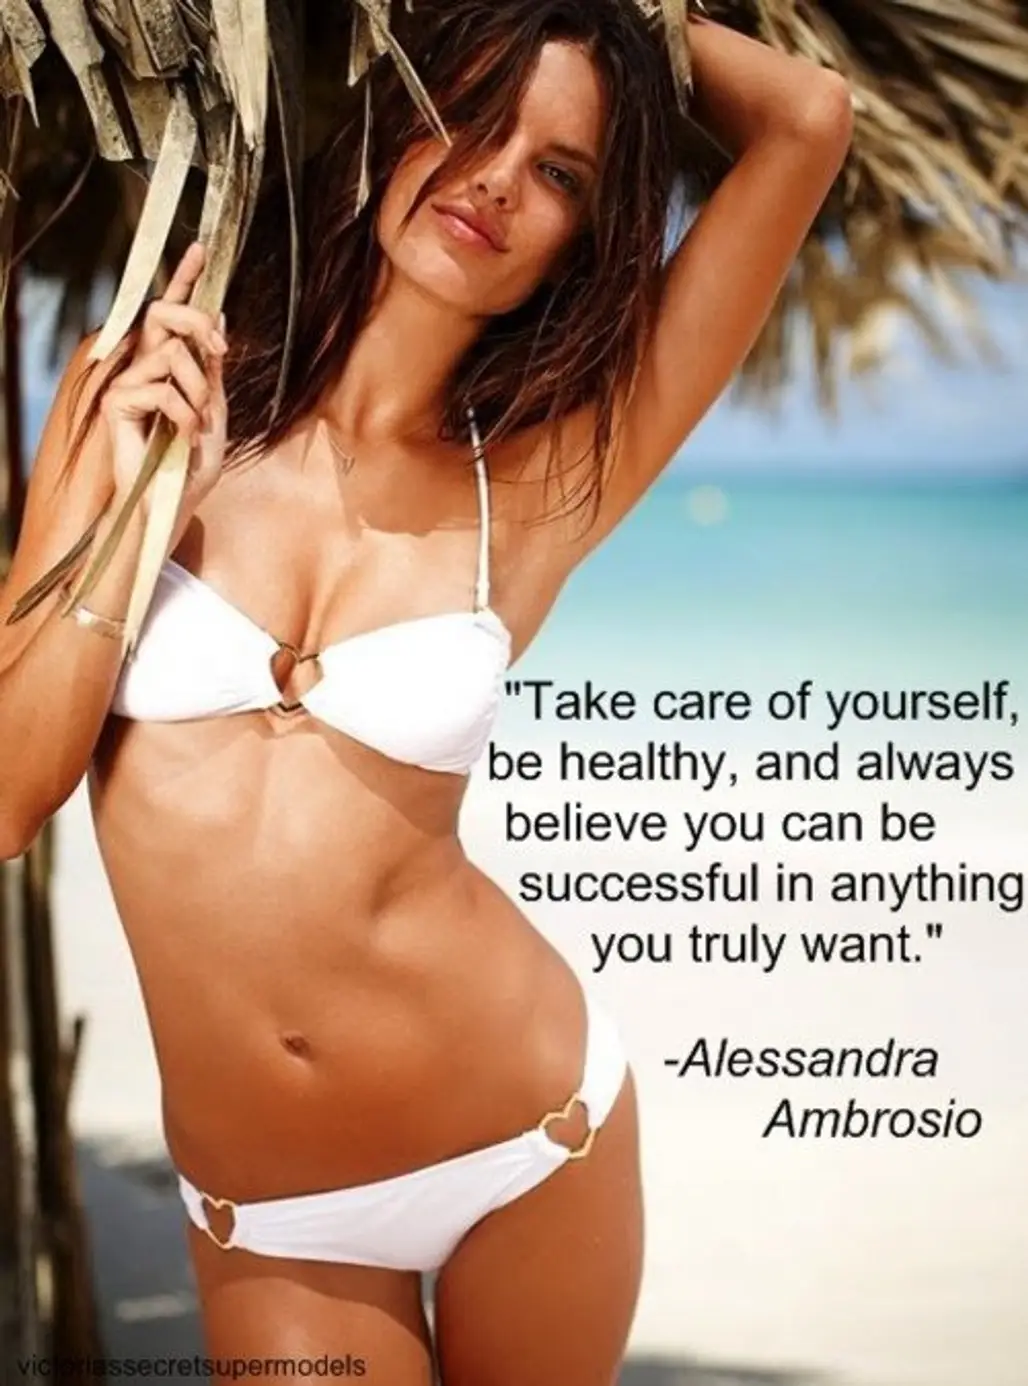 Alessandra Ambrosio on the Important Things in Life